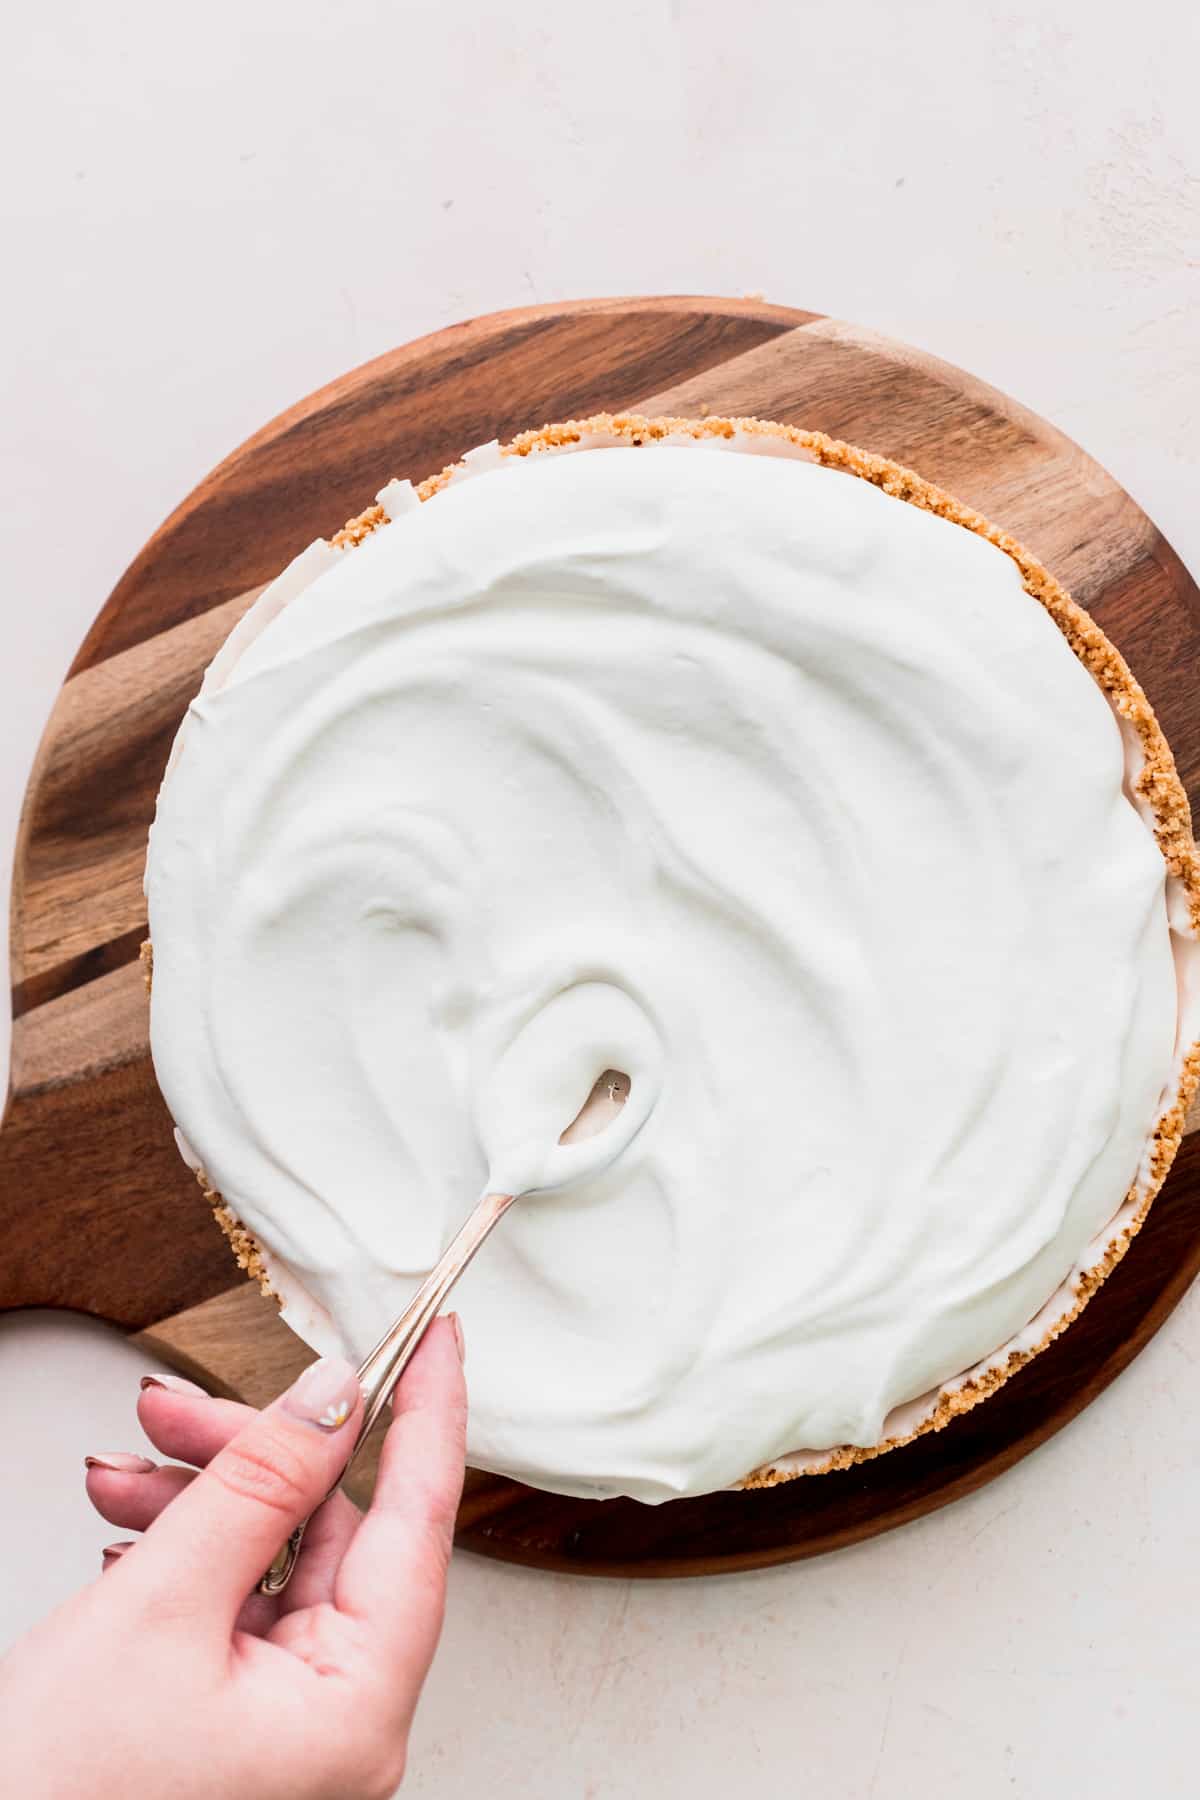 Spreading whipped cream on top of cheesecake.